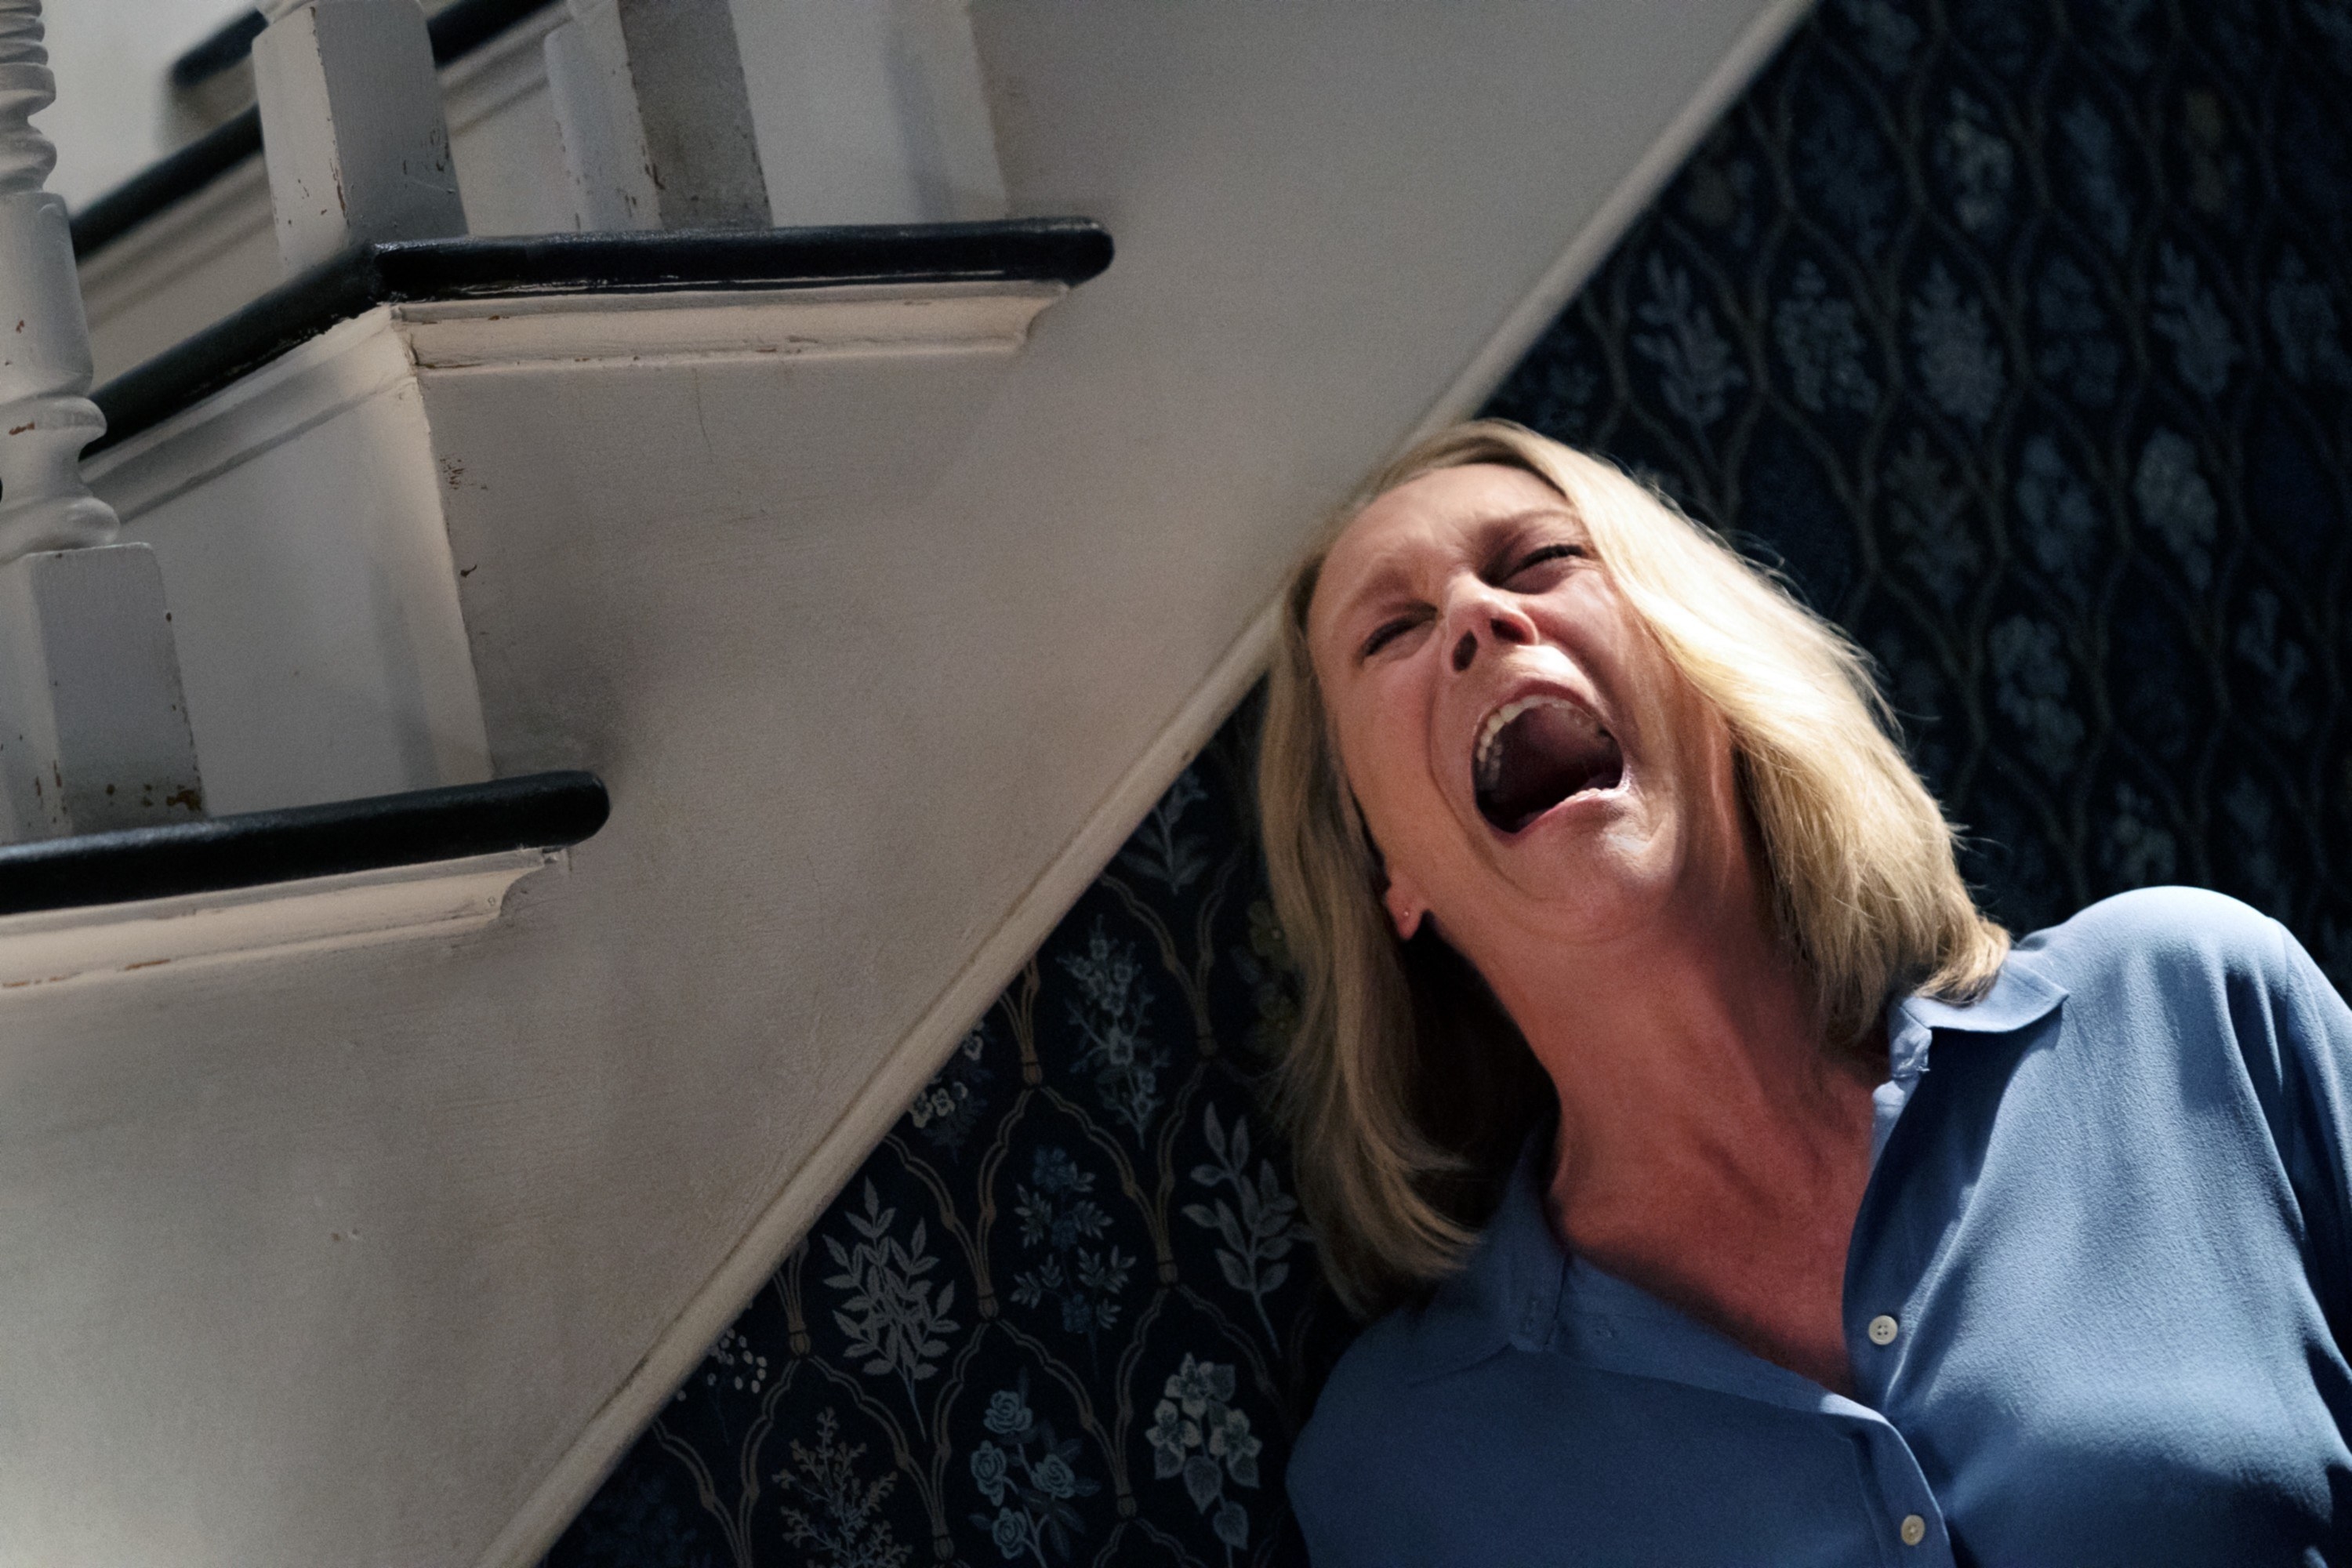 Laurie Strode screaming